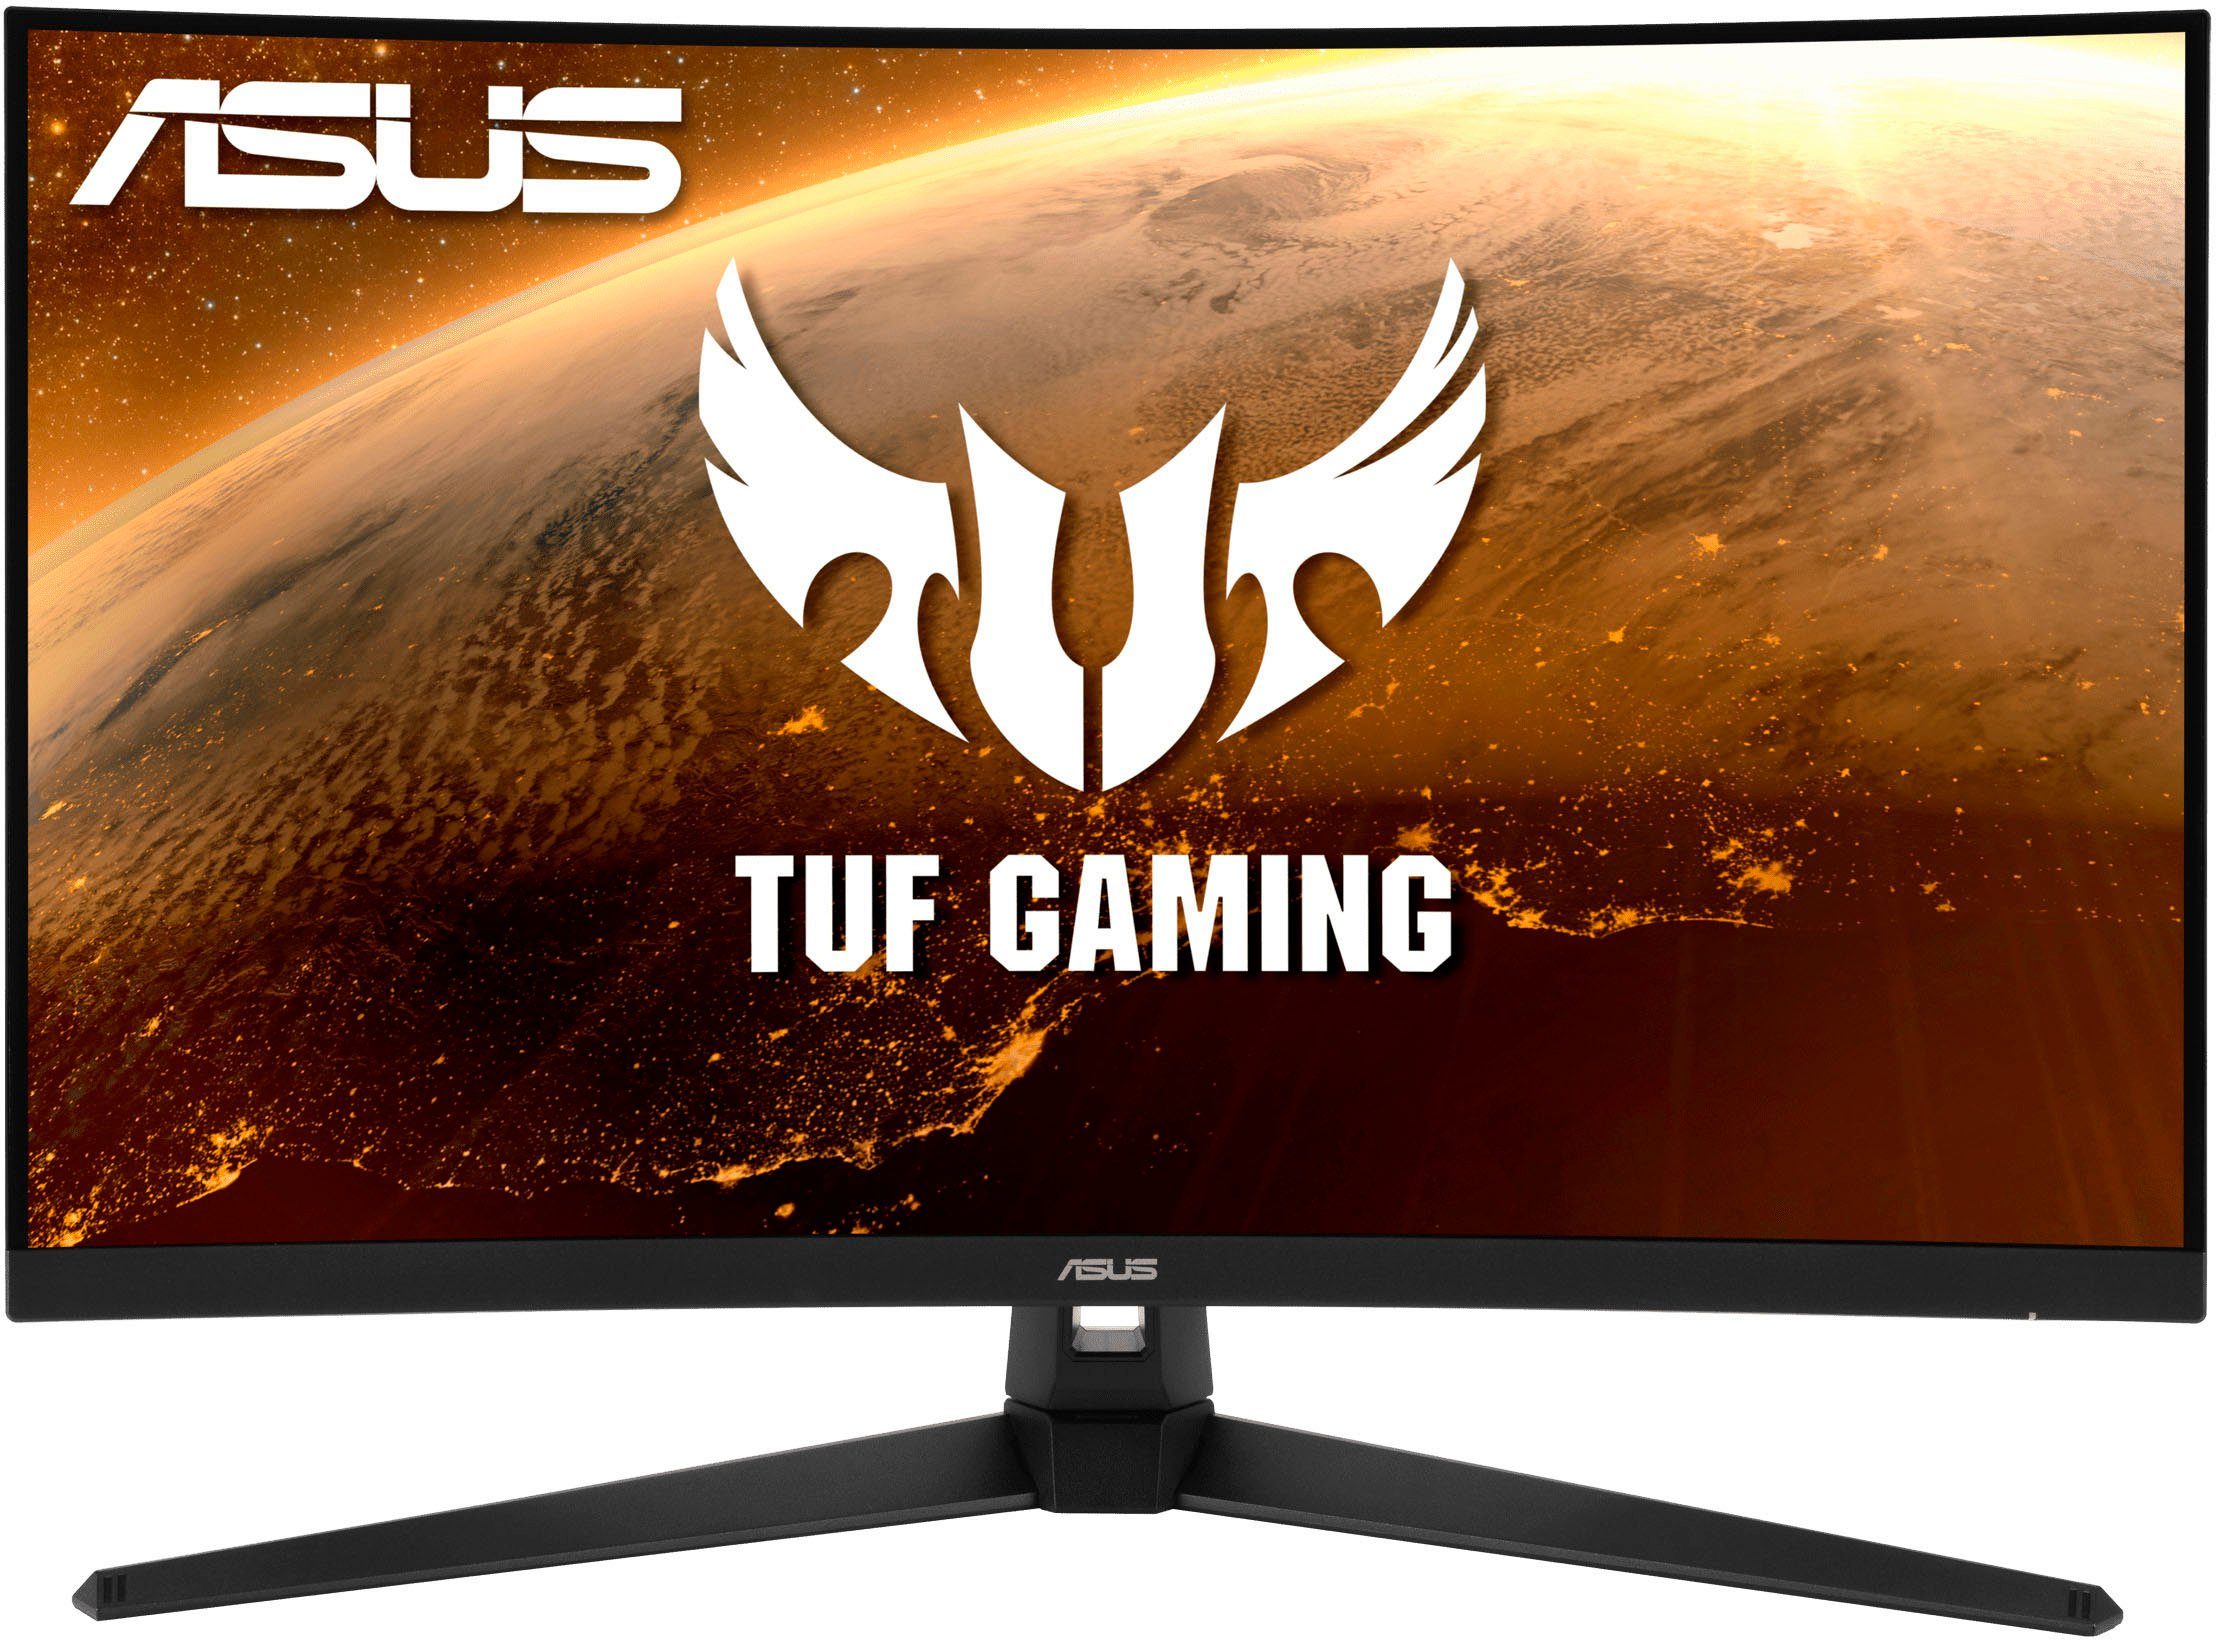 Asus VG32VQ1BR px, 165 QHD, 1 LED) 2560 Reaktionszeit, cm/31,5 ms Hz, x (80 Curved-Gaming-Monitor ", 1440